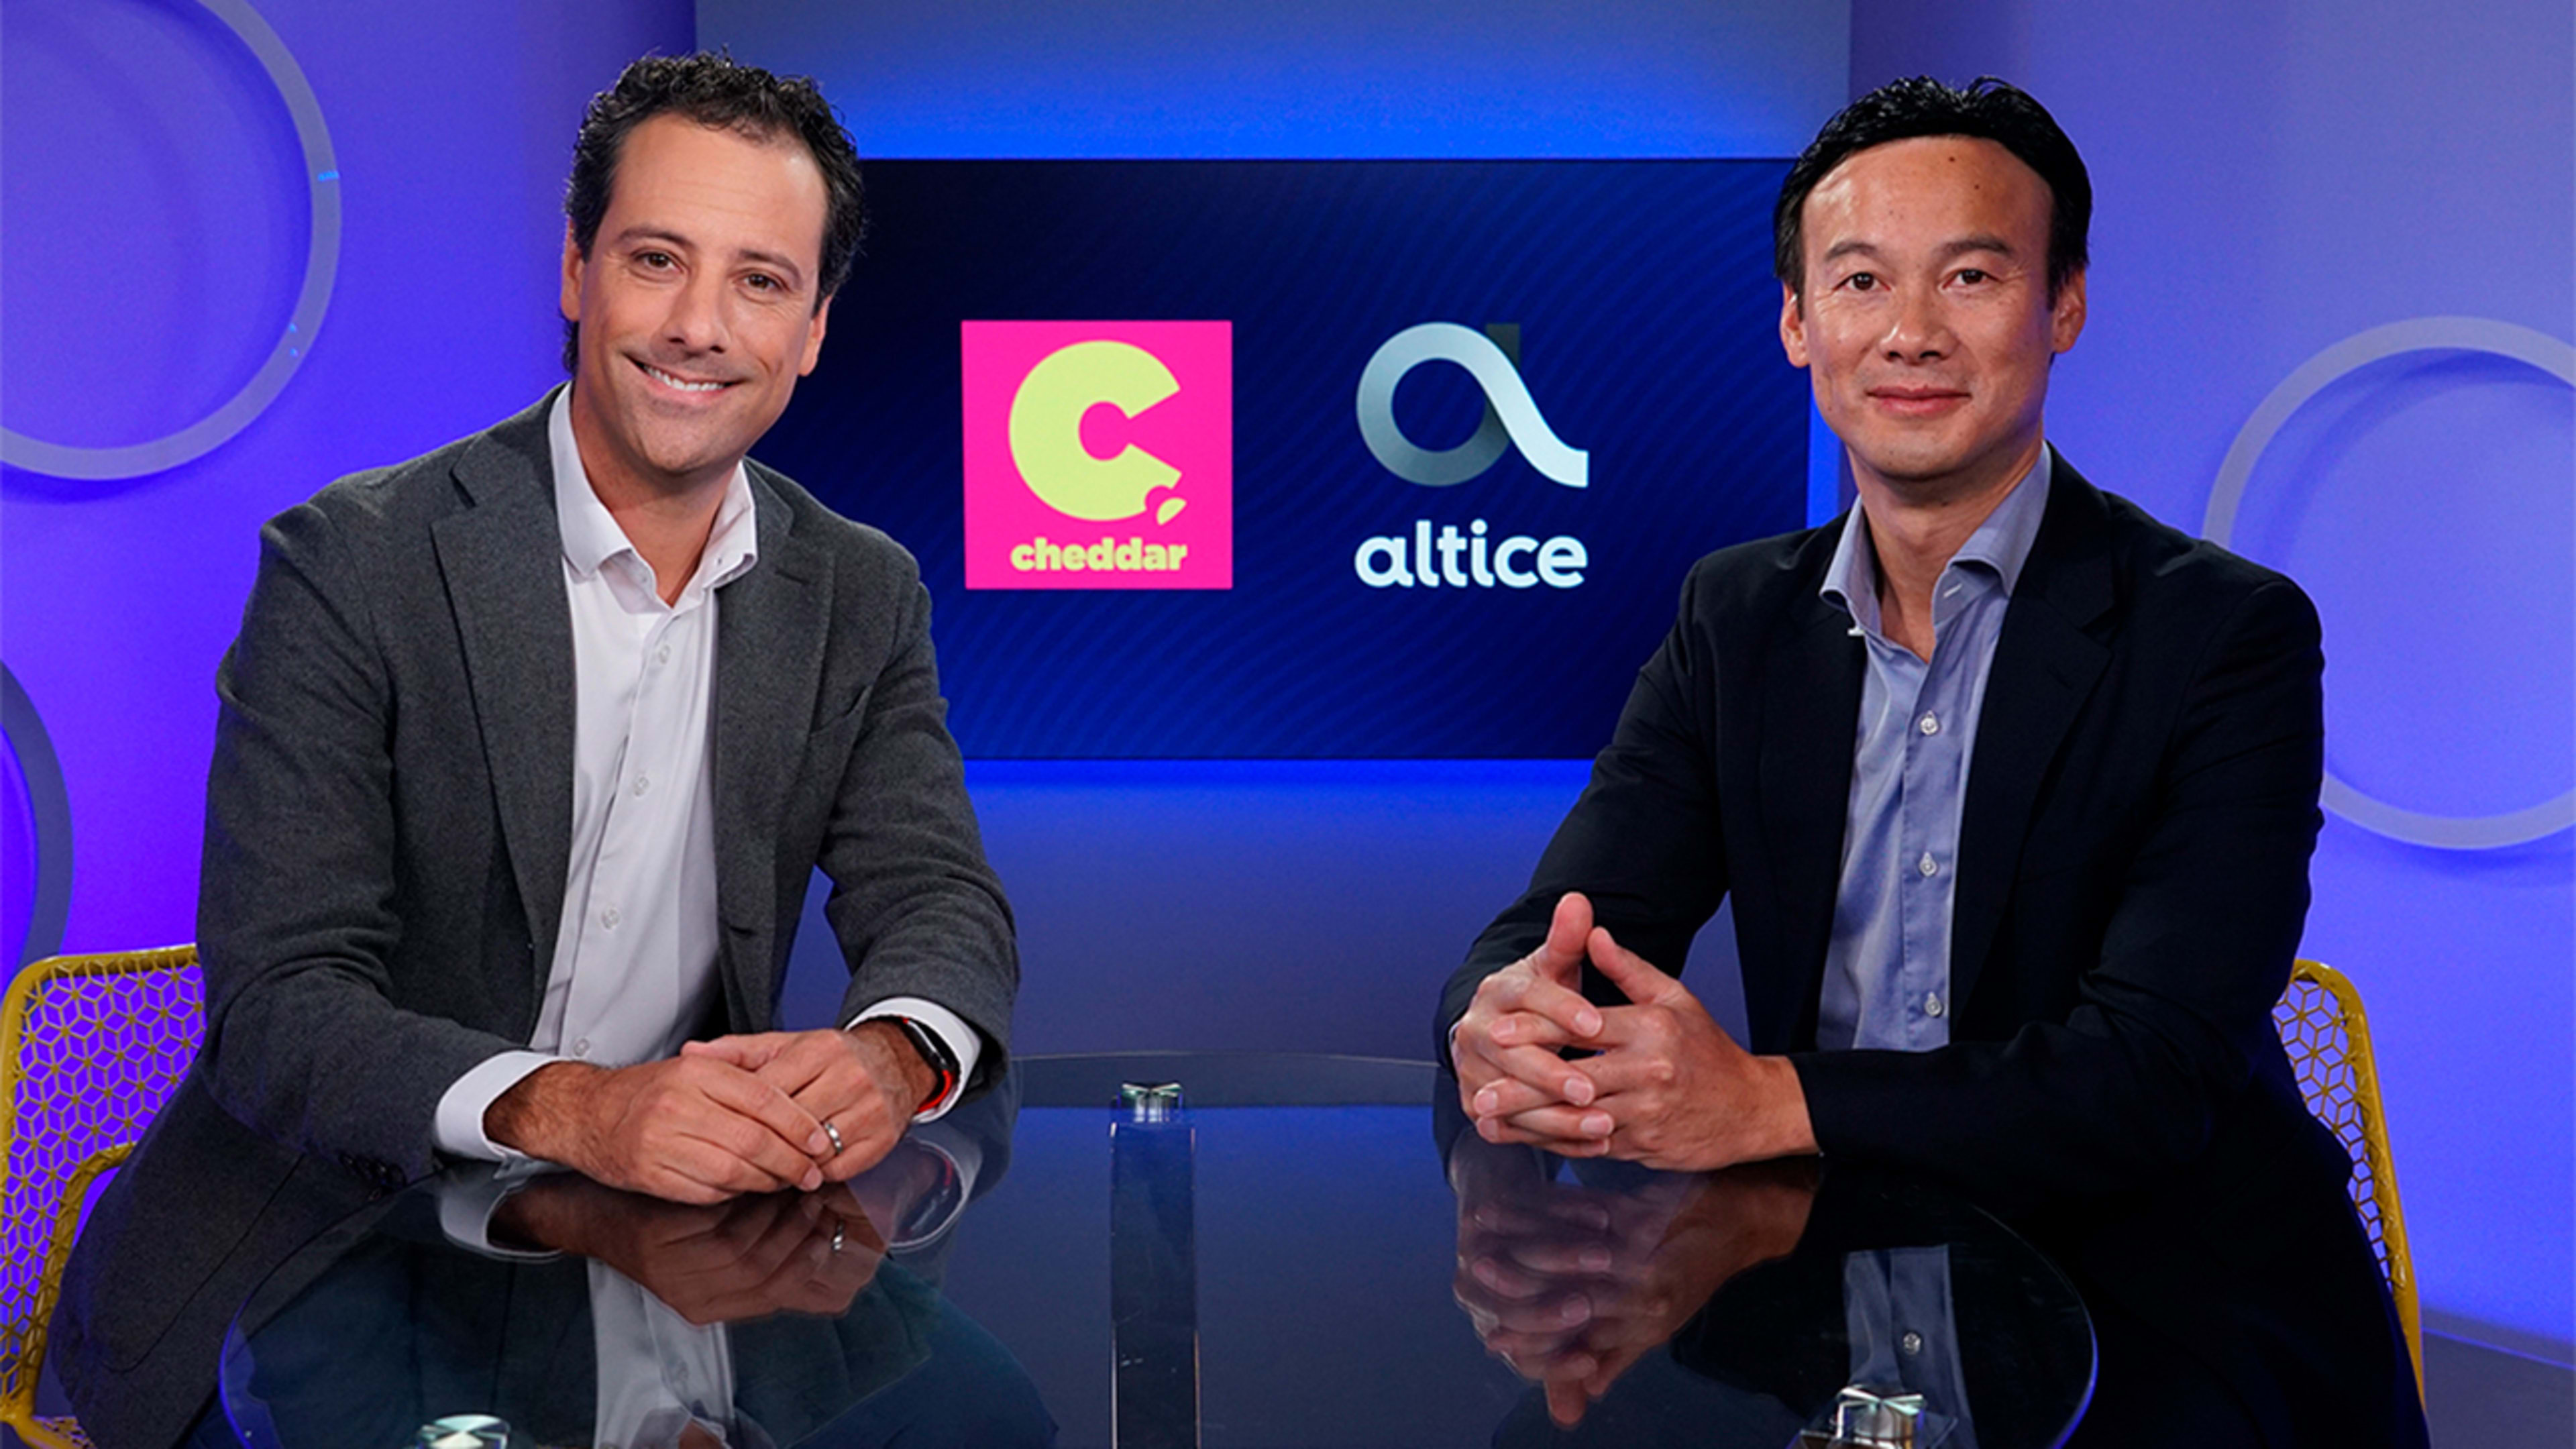 Cheddar, the so-called millennial CNBC, scooped up by Altice for $200M